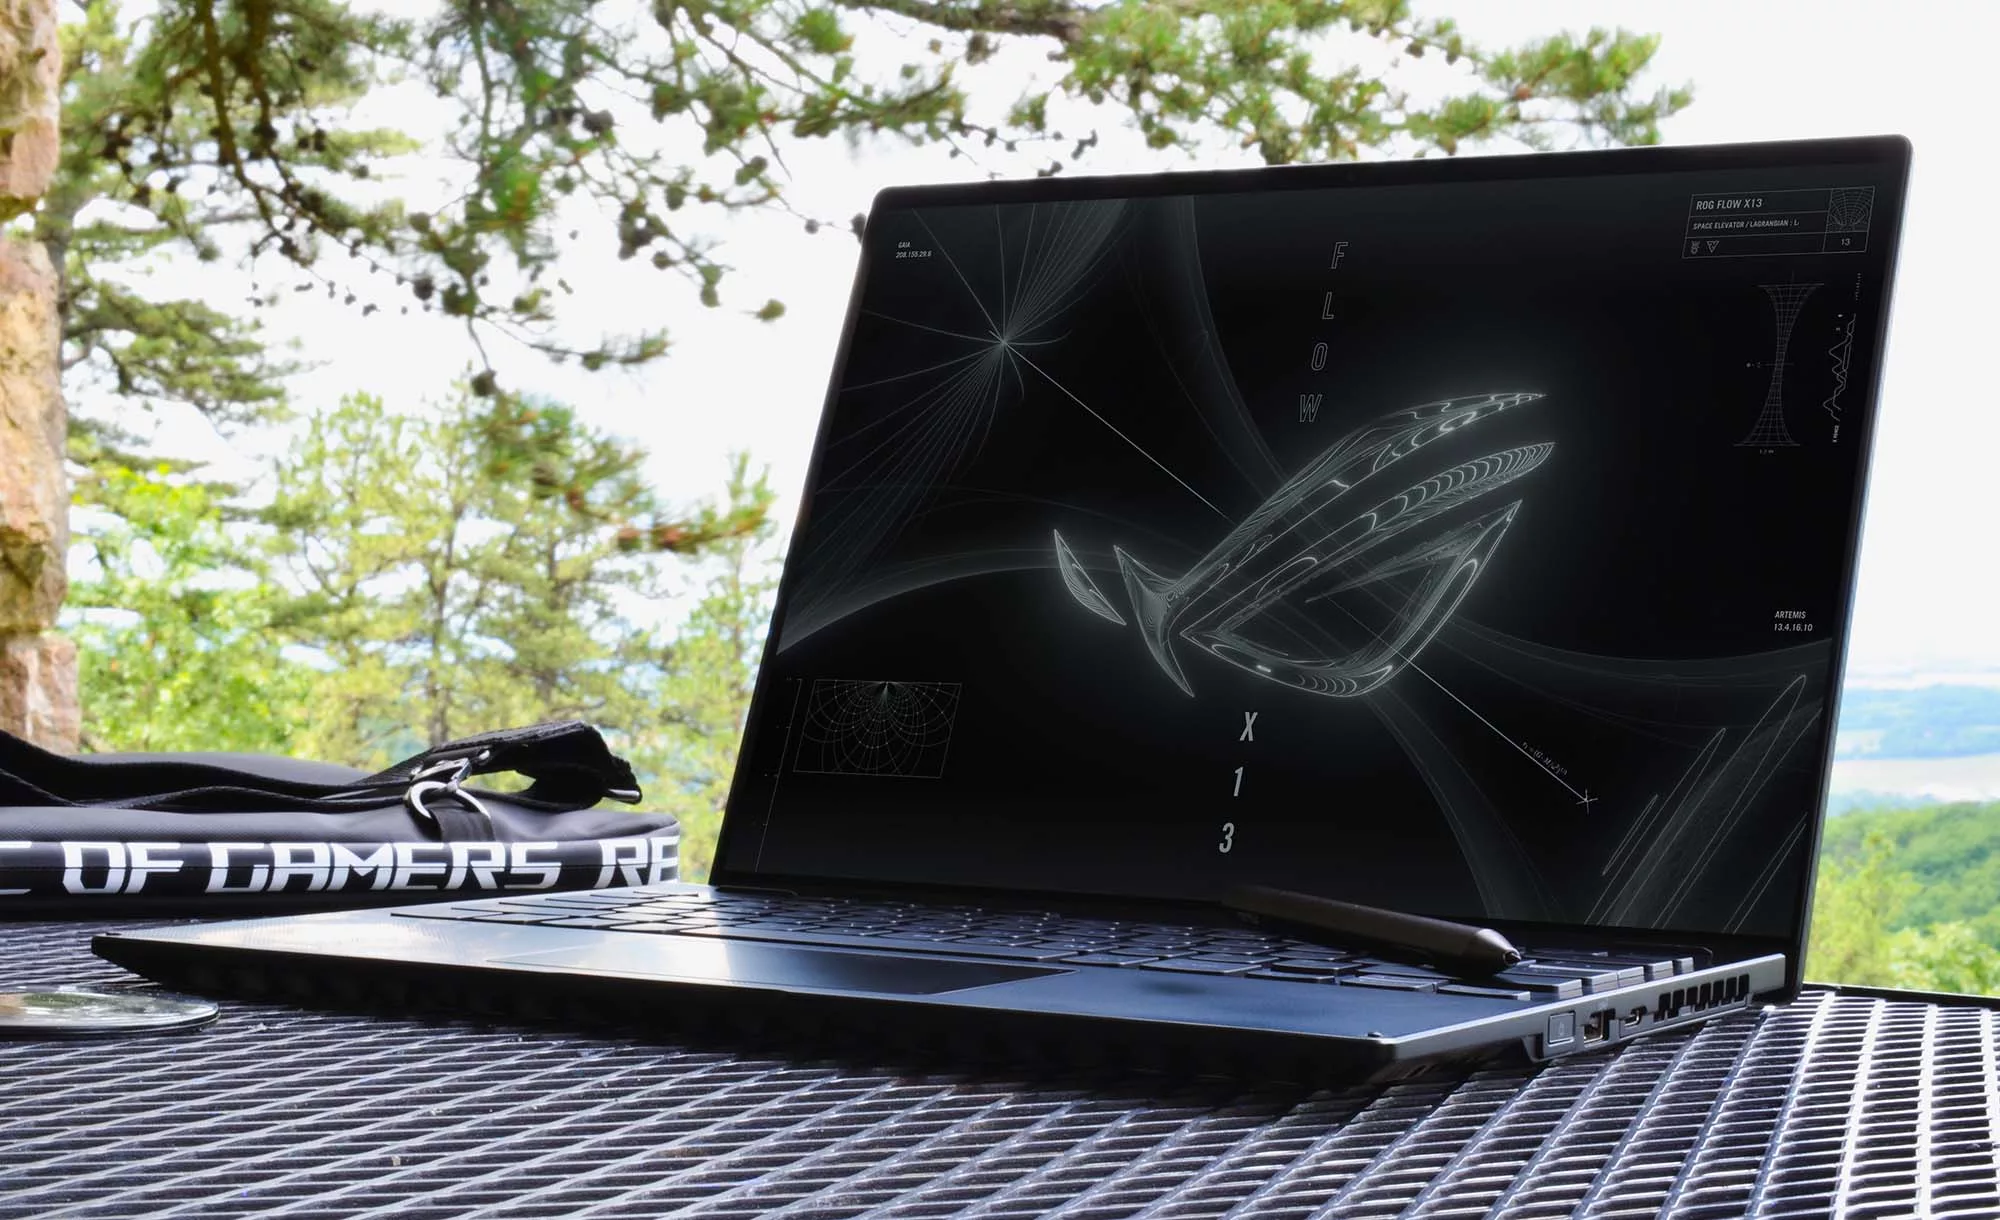 Flow X13 open with the ROG eye logo on display, with a forest in the background.